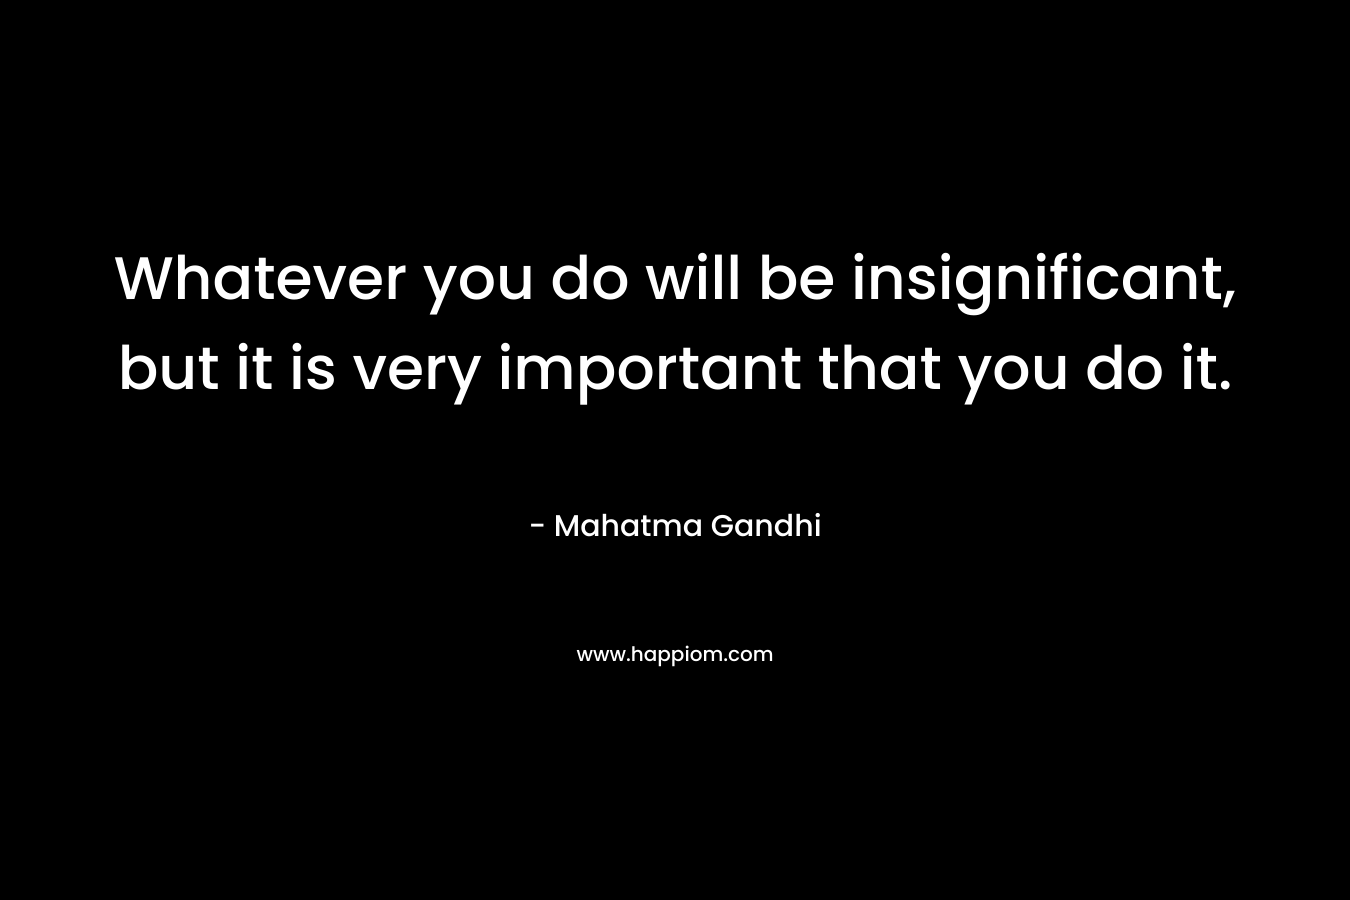 Whatever you do will be insignificant, but it is very important that you do it. – Mahatma Gandhi